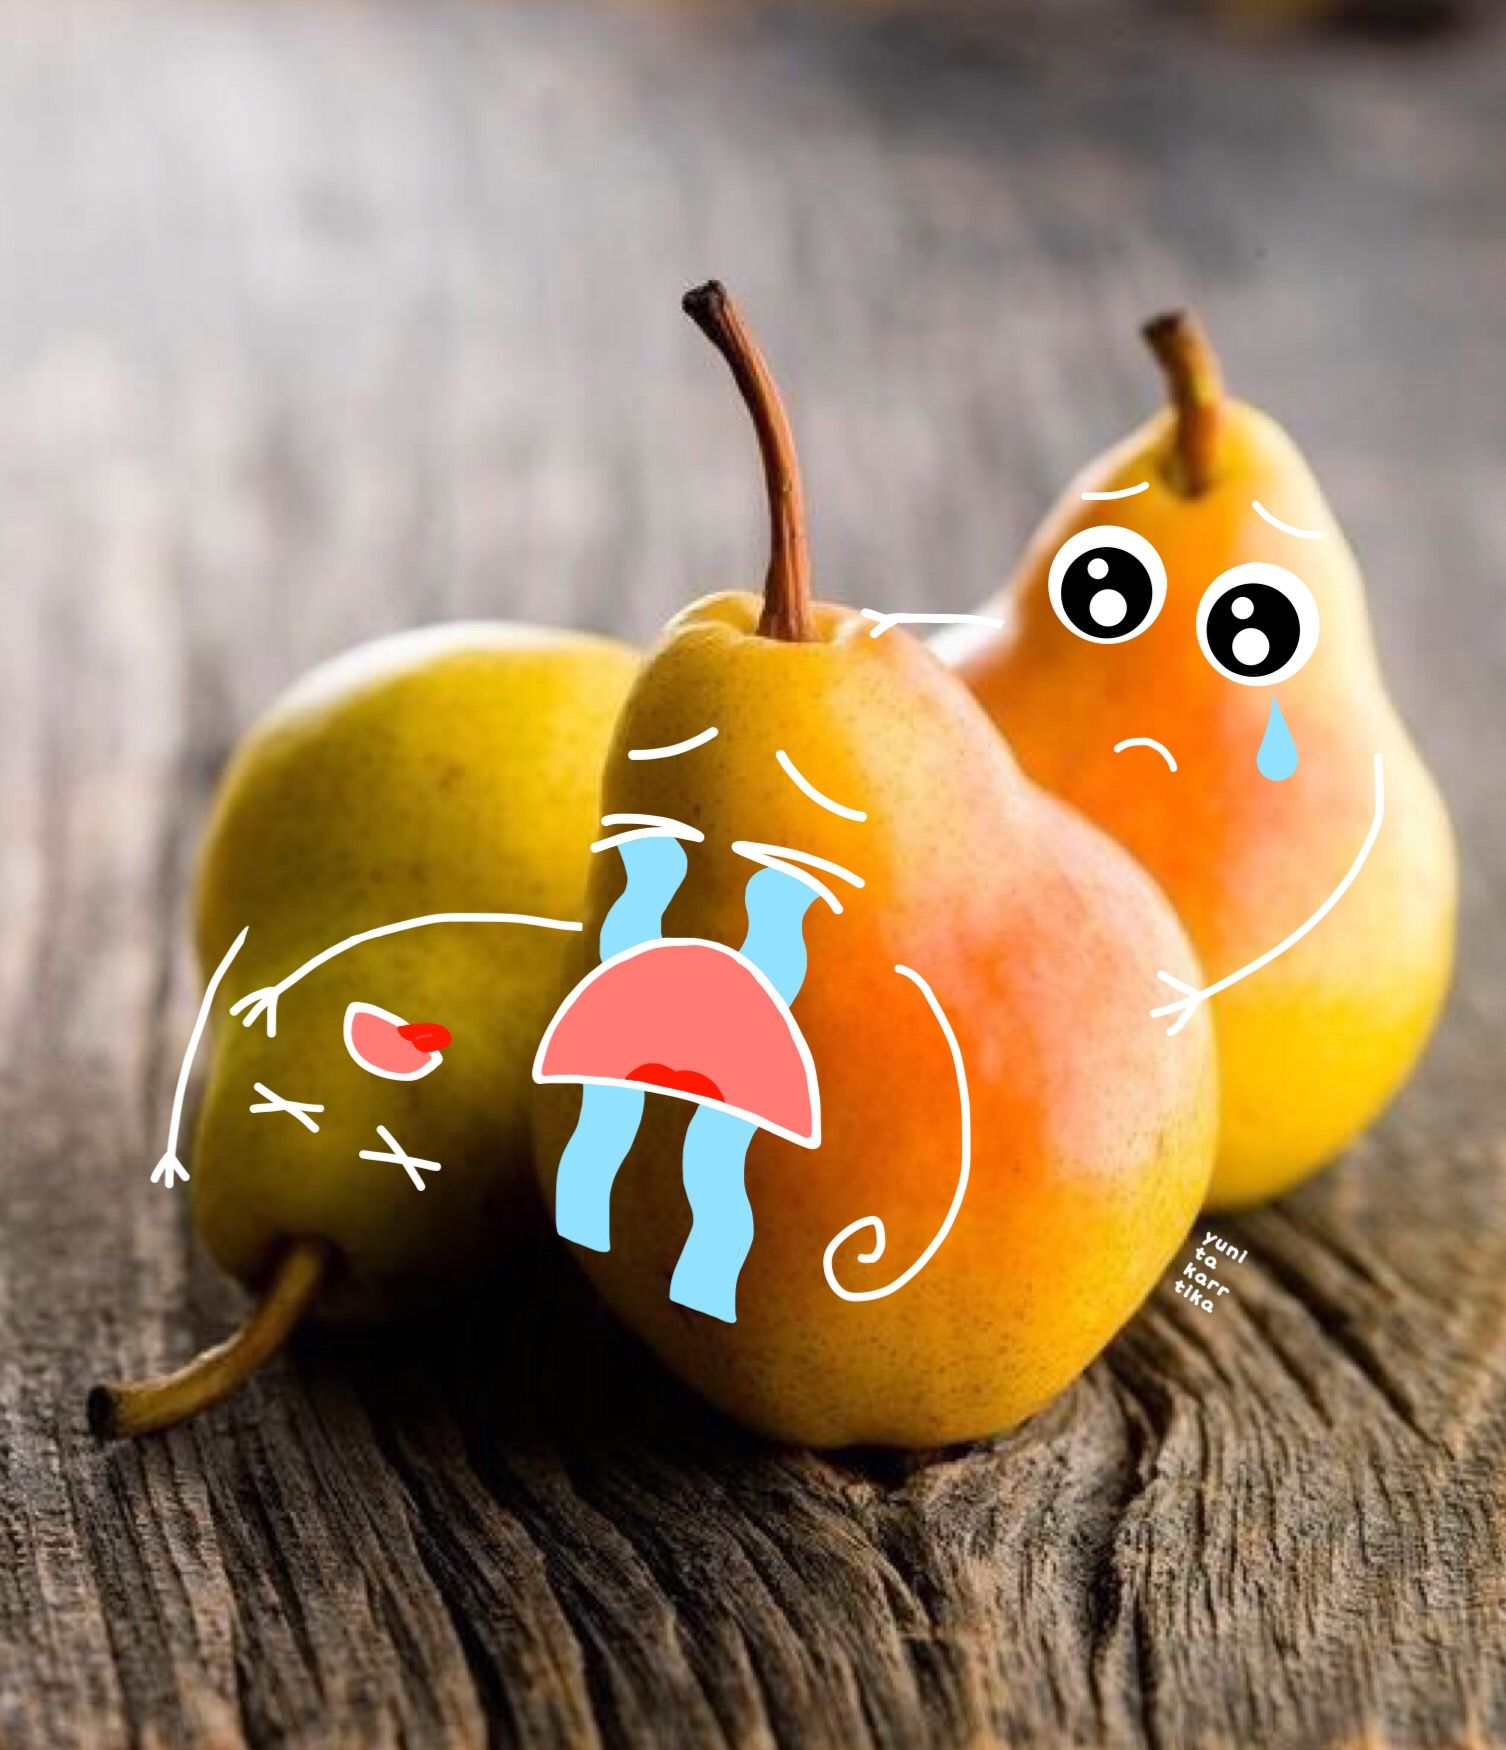 pear #fruit #cartoon #face #sad #yellow #tears Picture from ...